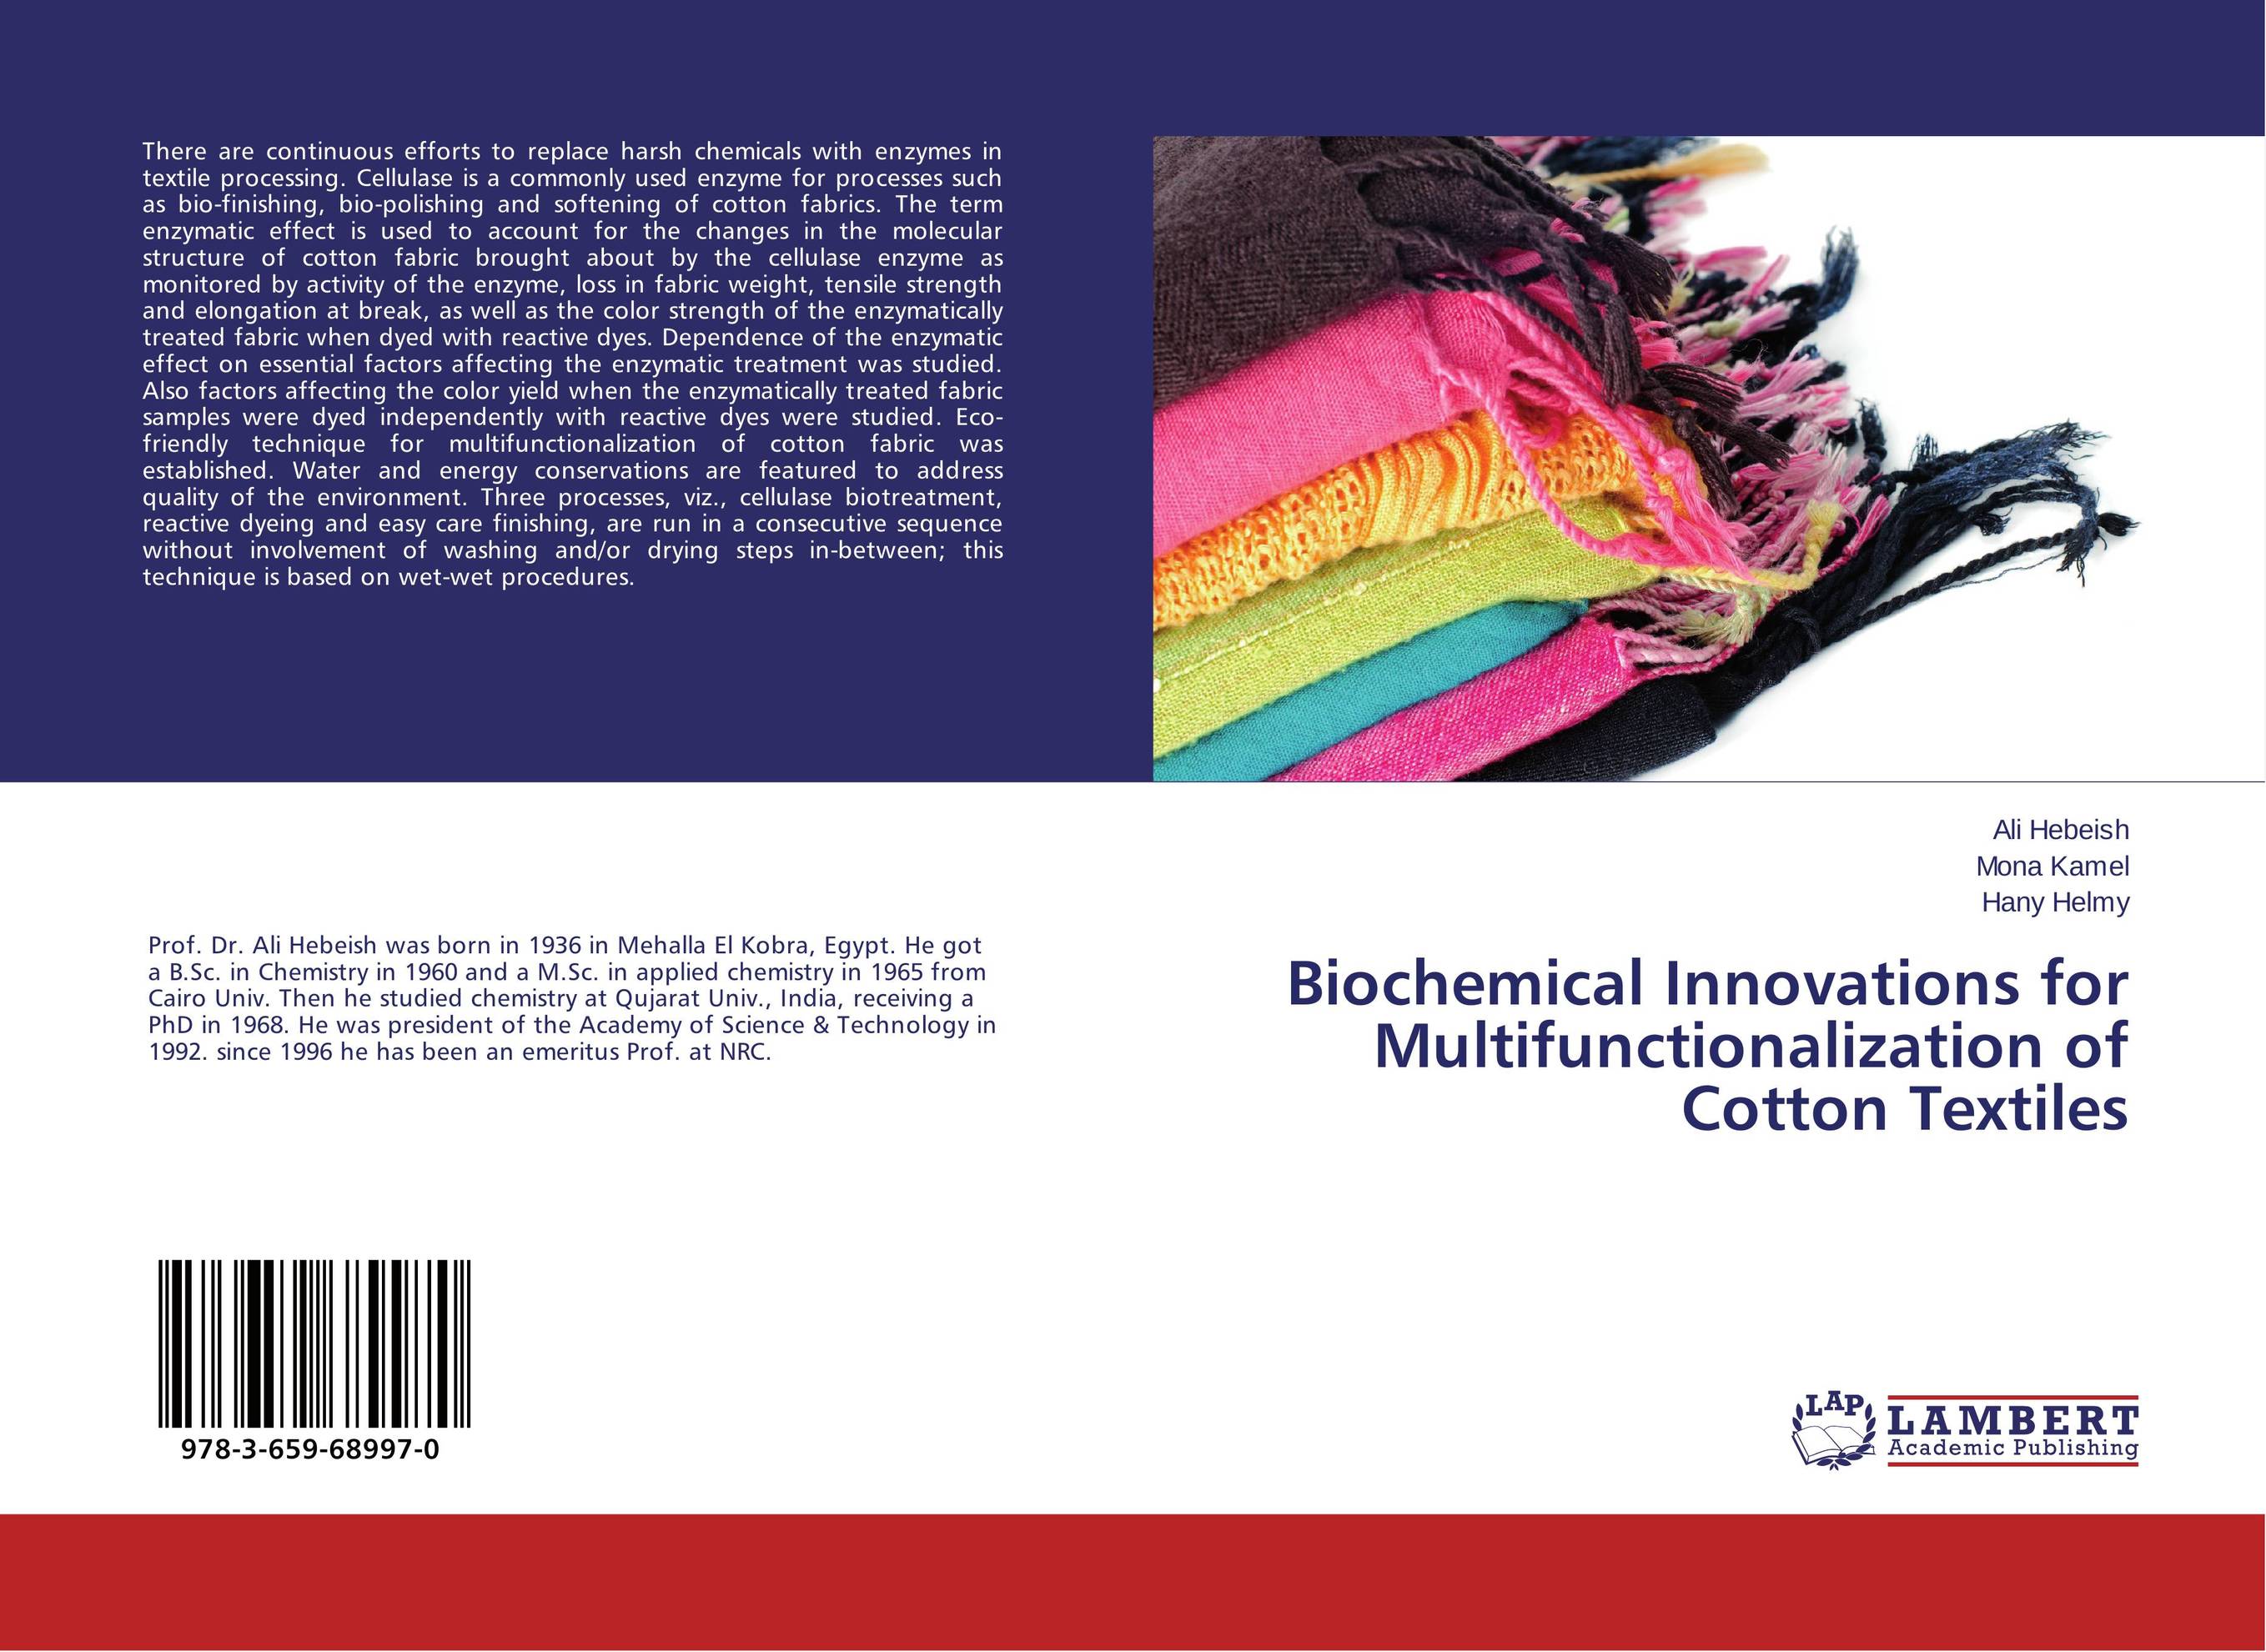 Biochemical Innovations for Multifunctionalization of Cotton Textiles